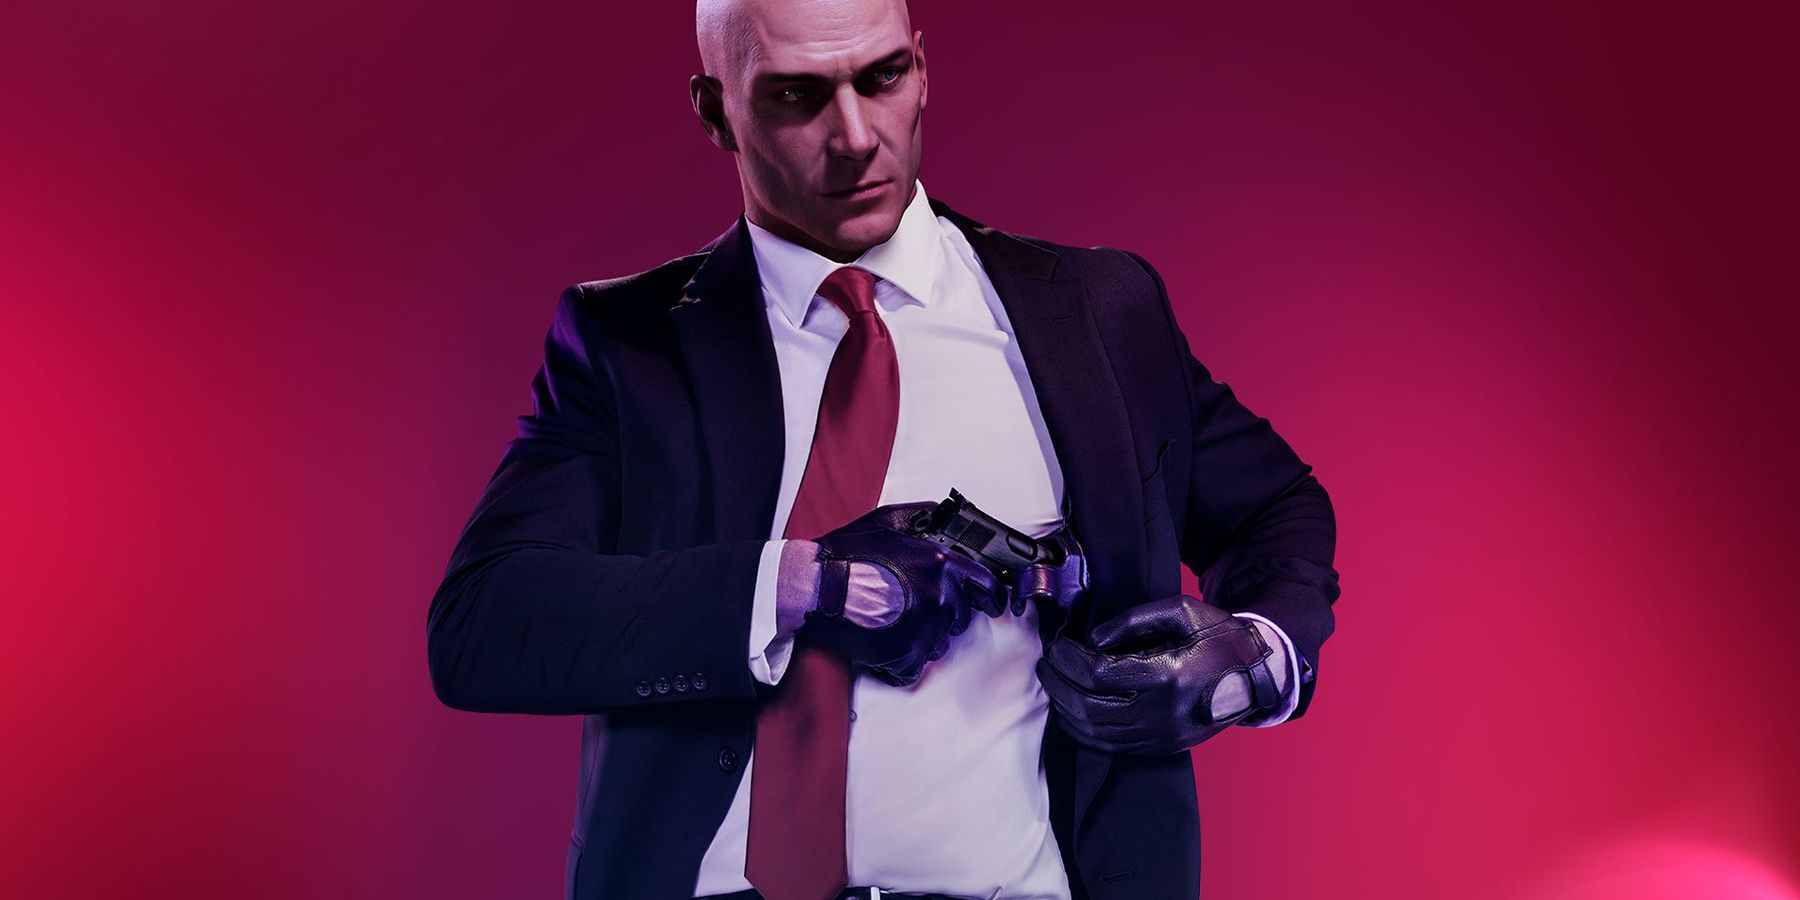 Hitman 2 Beginners Guide Tips & Tricks to Know Before You Play